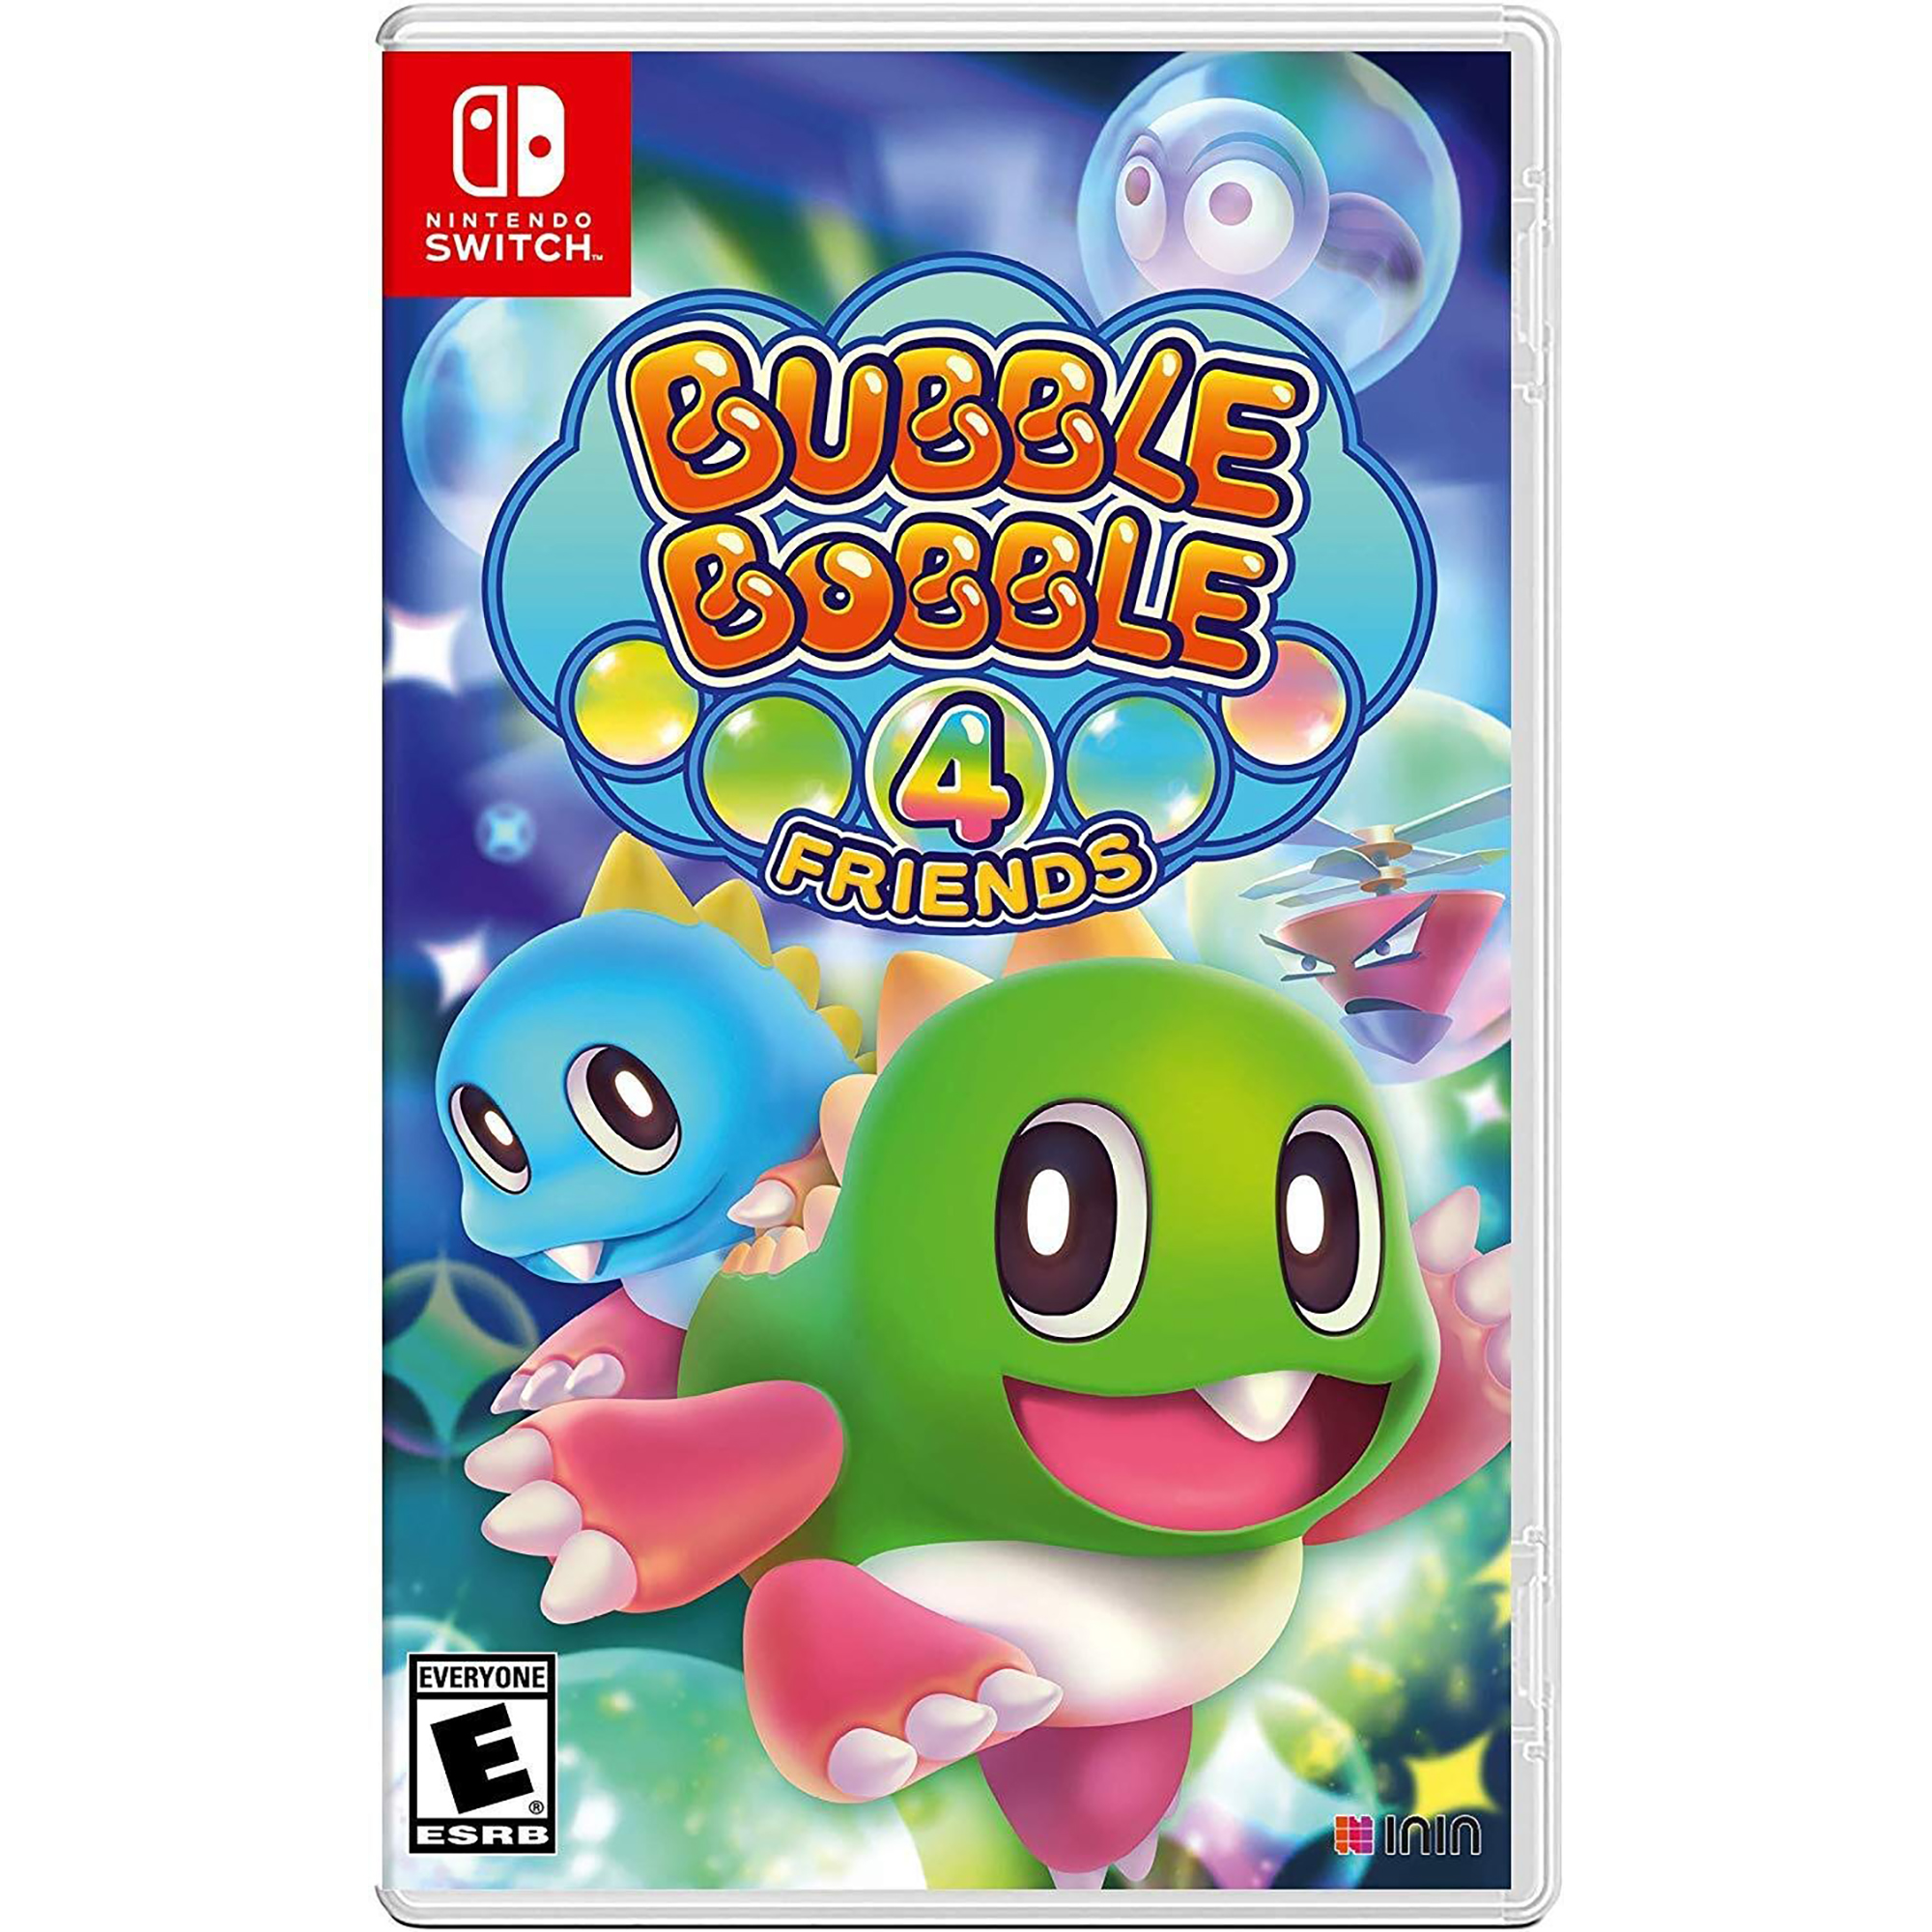 Bubble Bobble 4 Friends, ININ Games, Nintendo Switch [Physical] - image 1 of 3